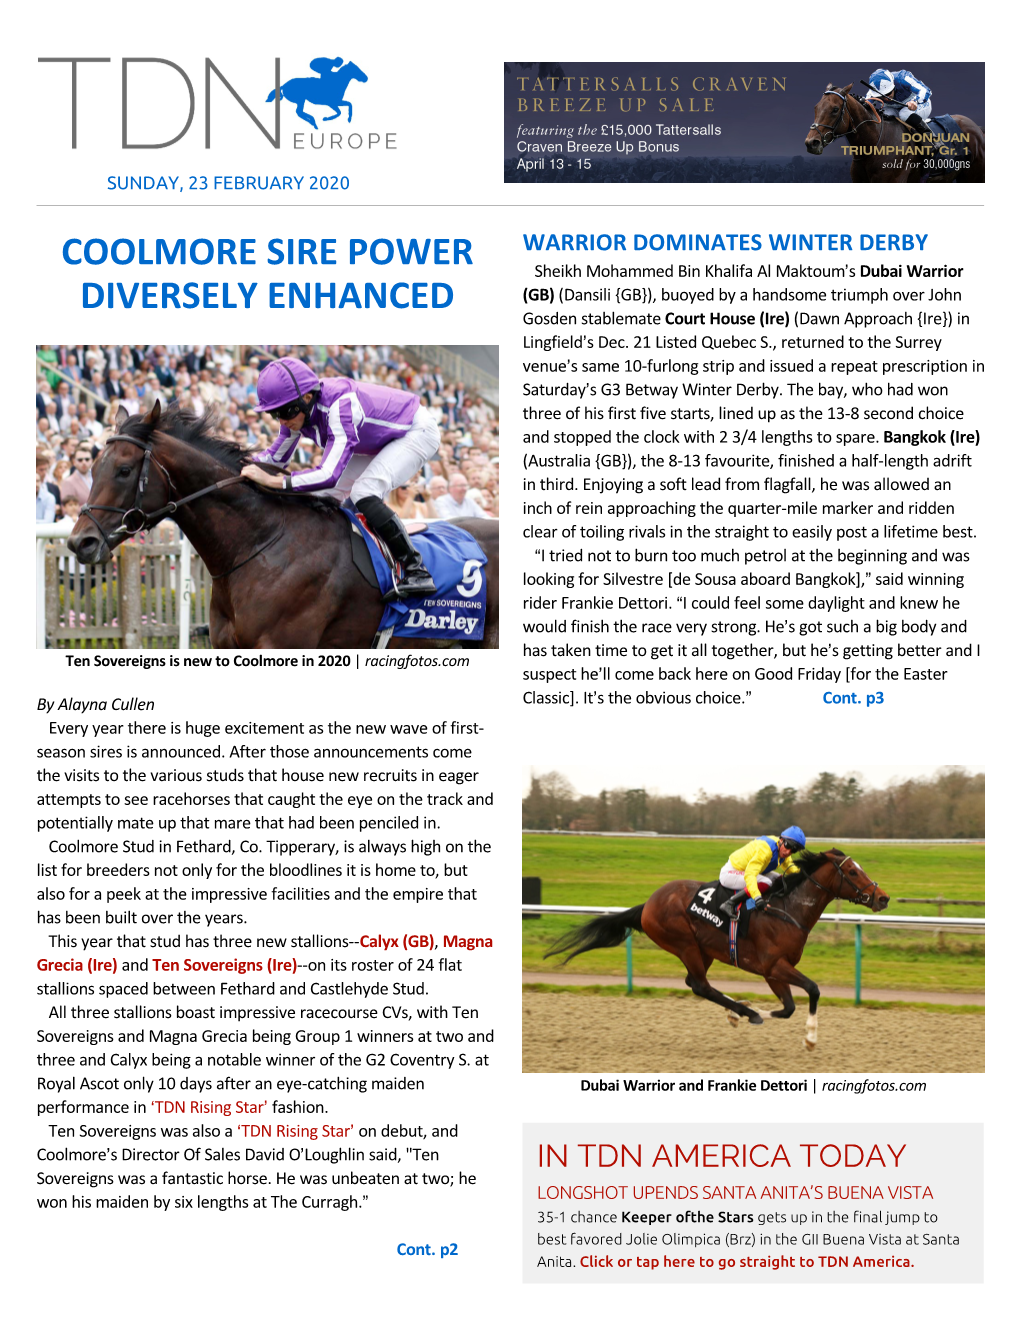 Coolmore Sire Power Diversely Enhanced Cont